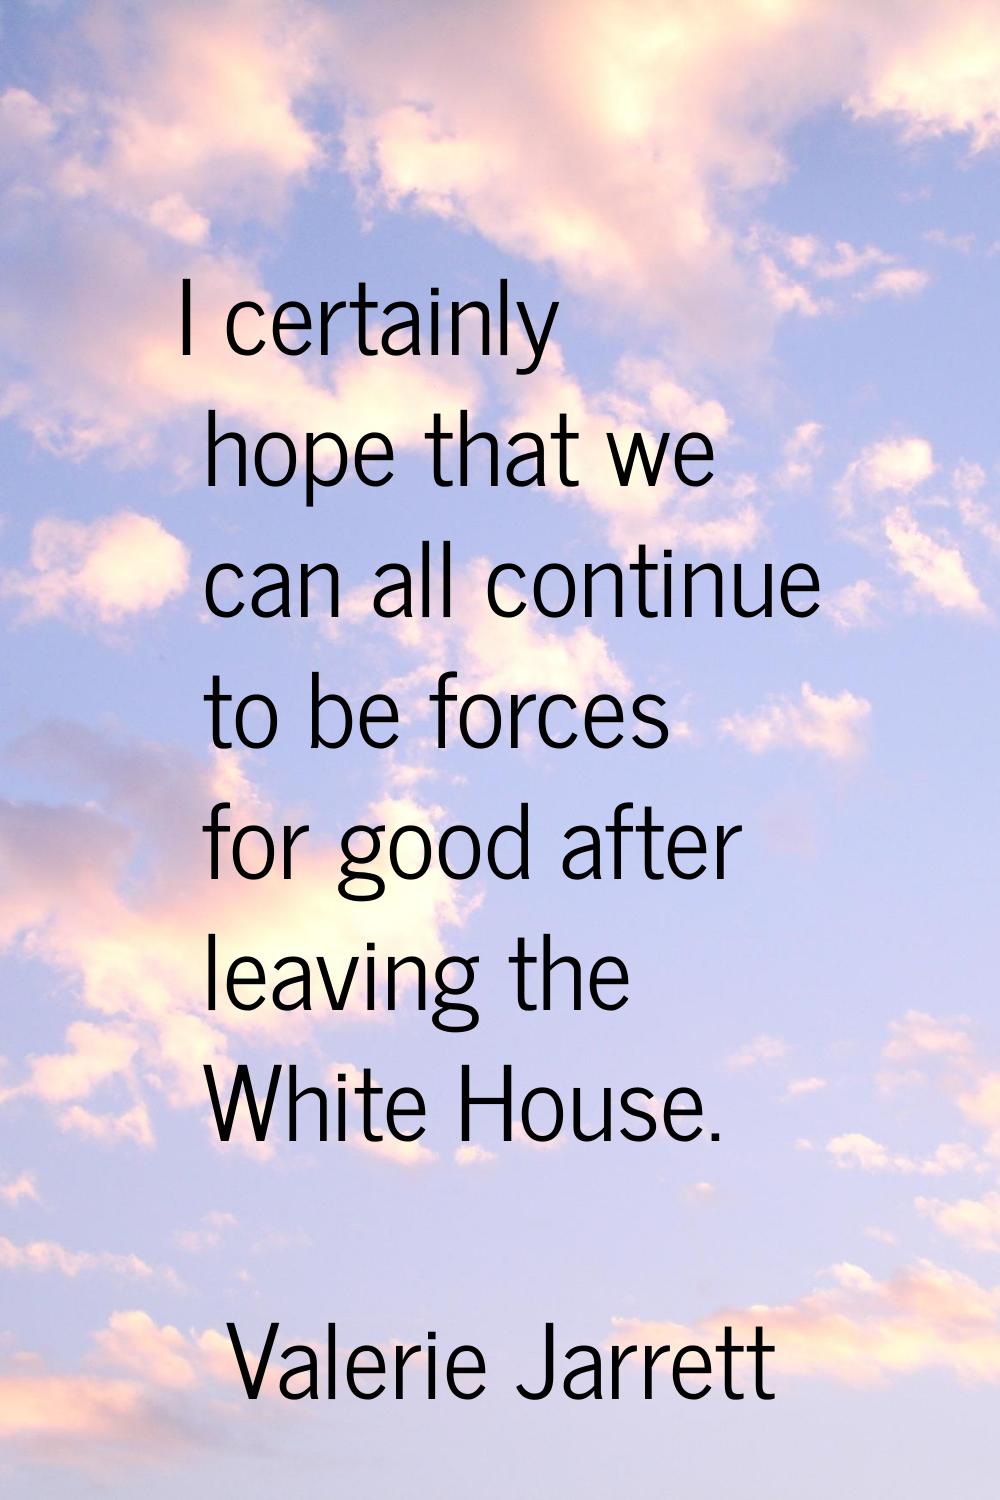 I certainly hope that we can all continue to be forces for good after leaving the White House.